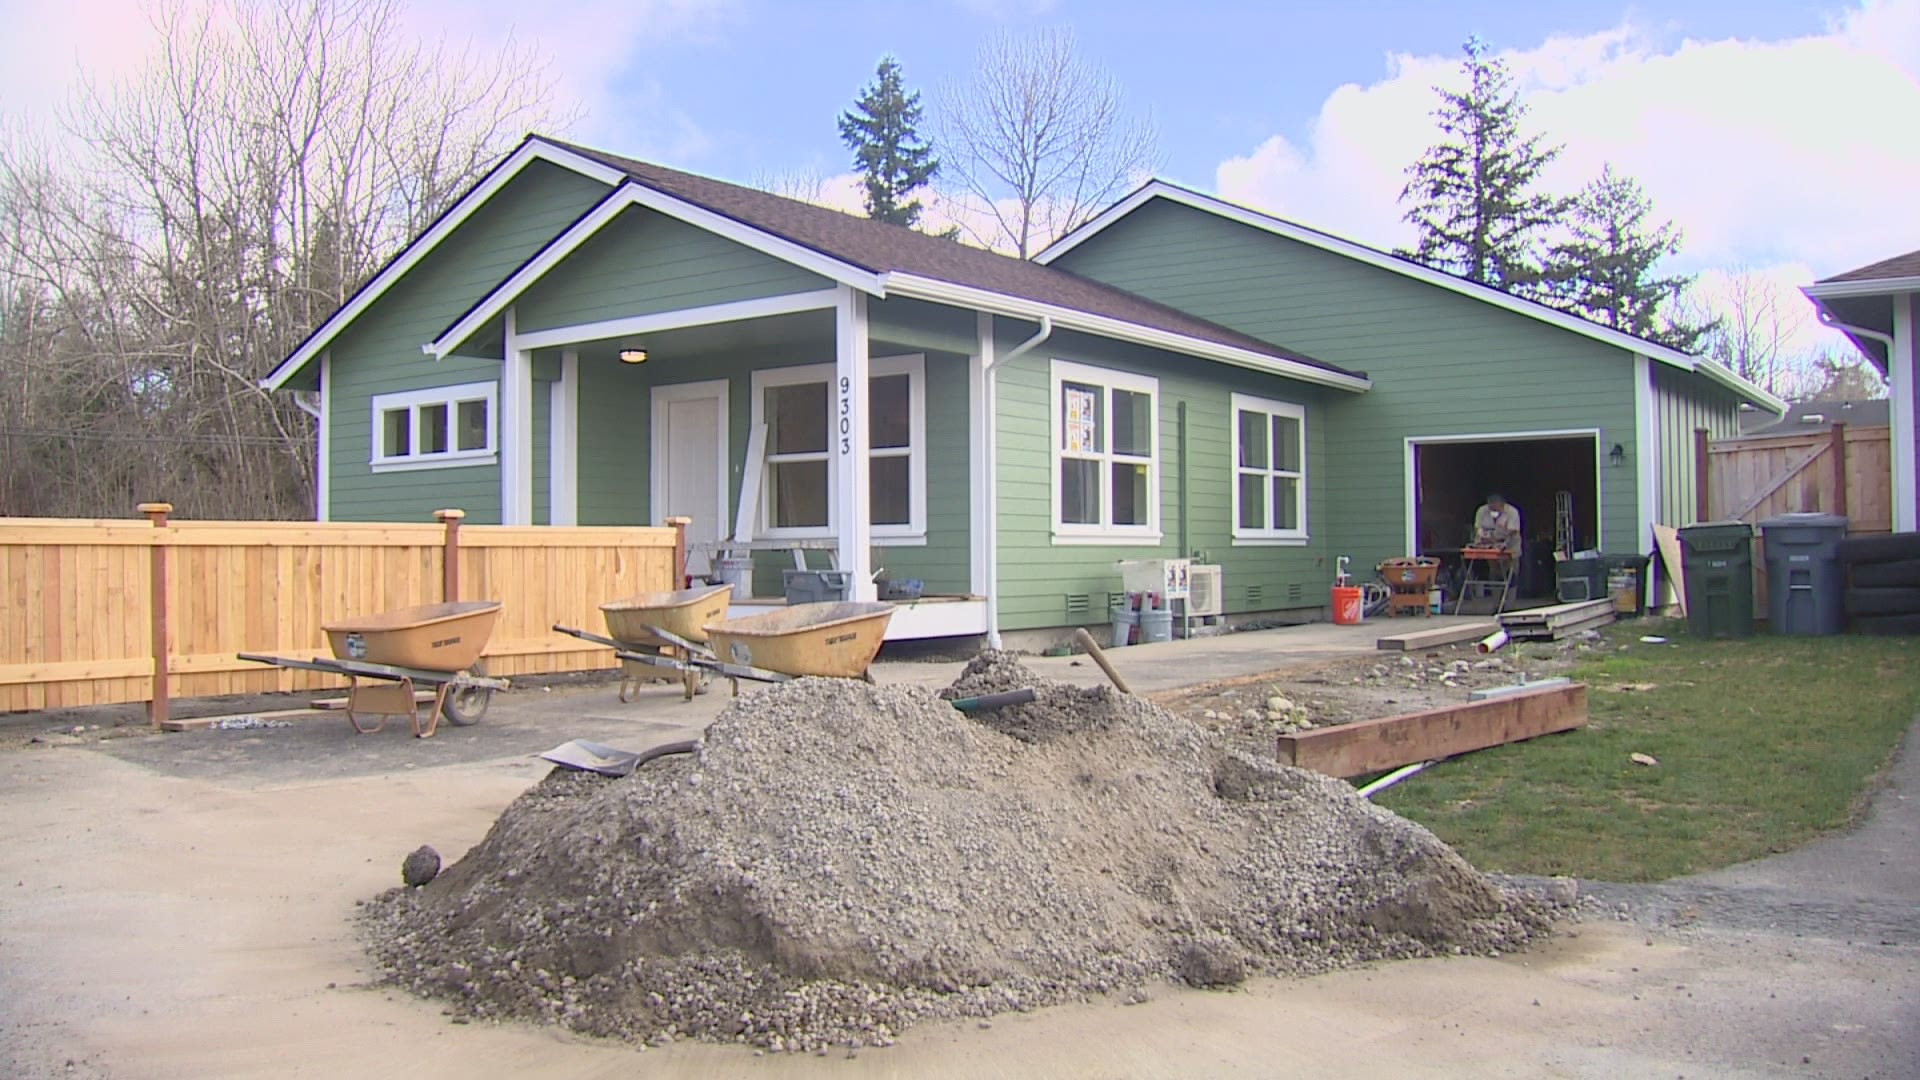 Increasing home prices and interest rates, along with lack of available homes, is creating a difficult environment for potential home buyers in Pierce County.